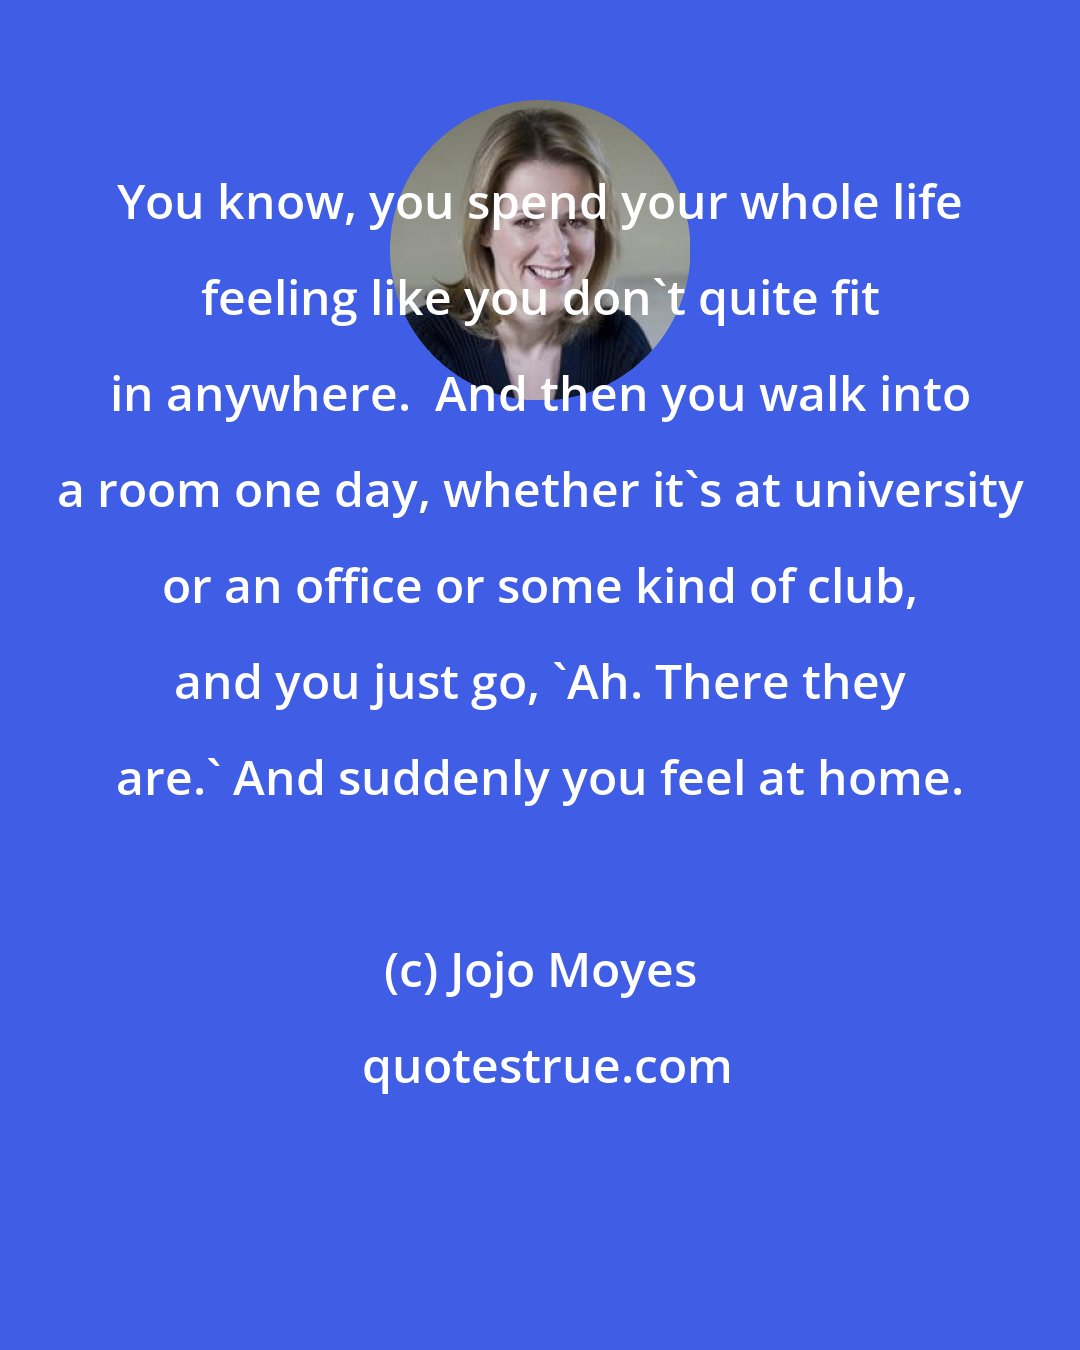 Jojo Moyes: You know, you spend your whole life feeling like you don't quite fit in anywhere.  And then you walk into a room one day, whether it's at university or an office or some kind of club, and you just go, 'Ah. There they are.' And suddenly you feel at home.